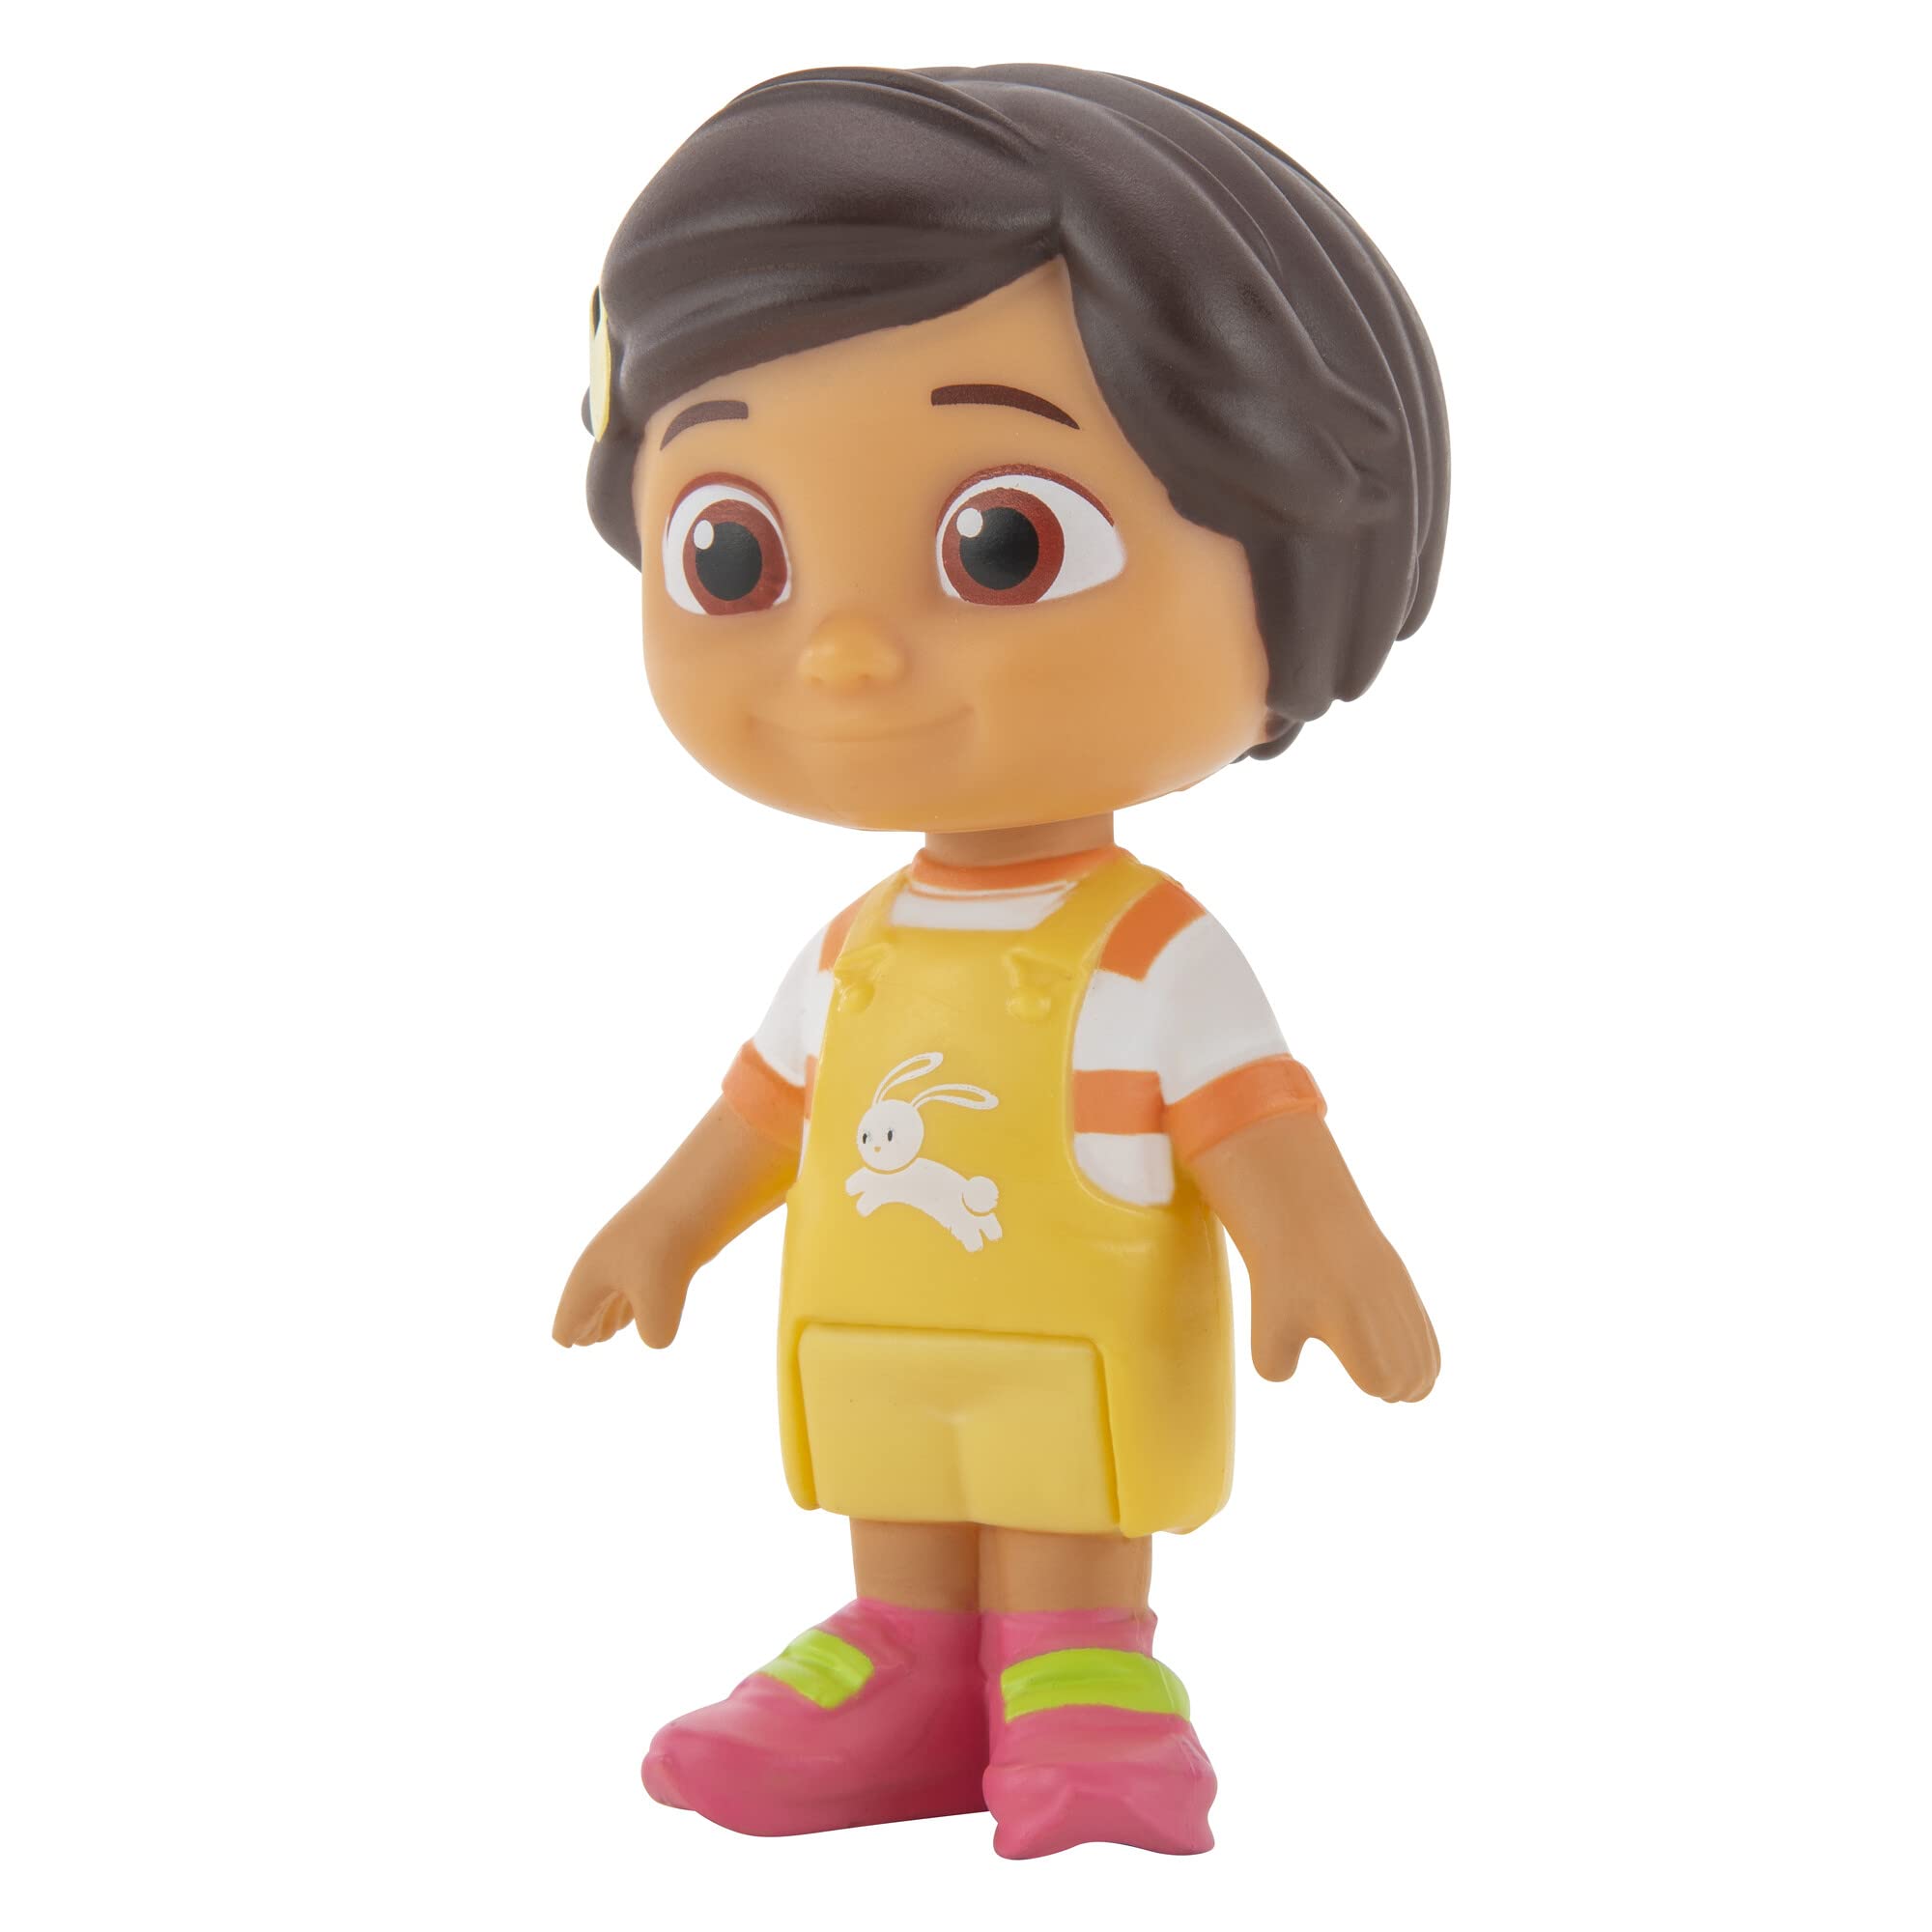 CoComelon Official Friends & Family, 6 Figure Pack - 3 Inch Character Toys - Features Two Baby JJ Figures (Tee and Onesie), Tomtom, YoYo, Cody, and Nina - Toys for Babies and Toddlers